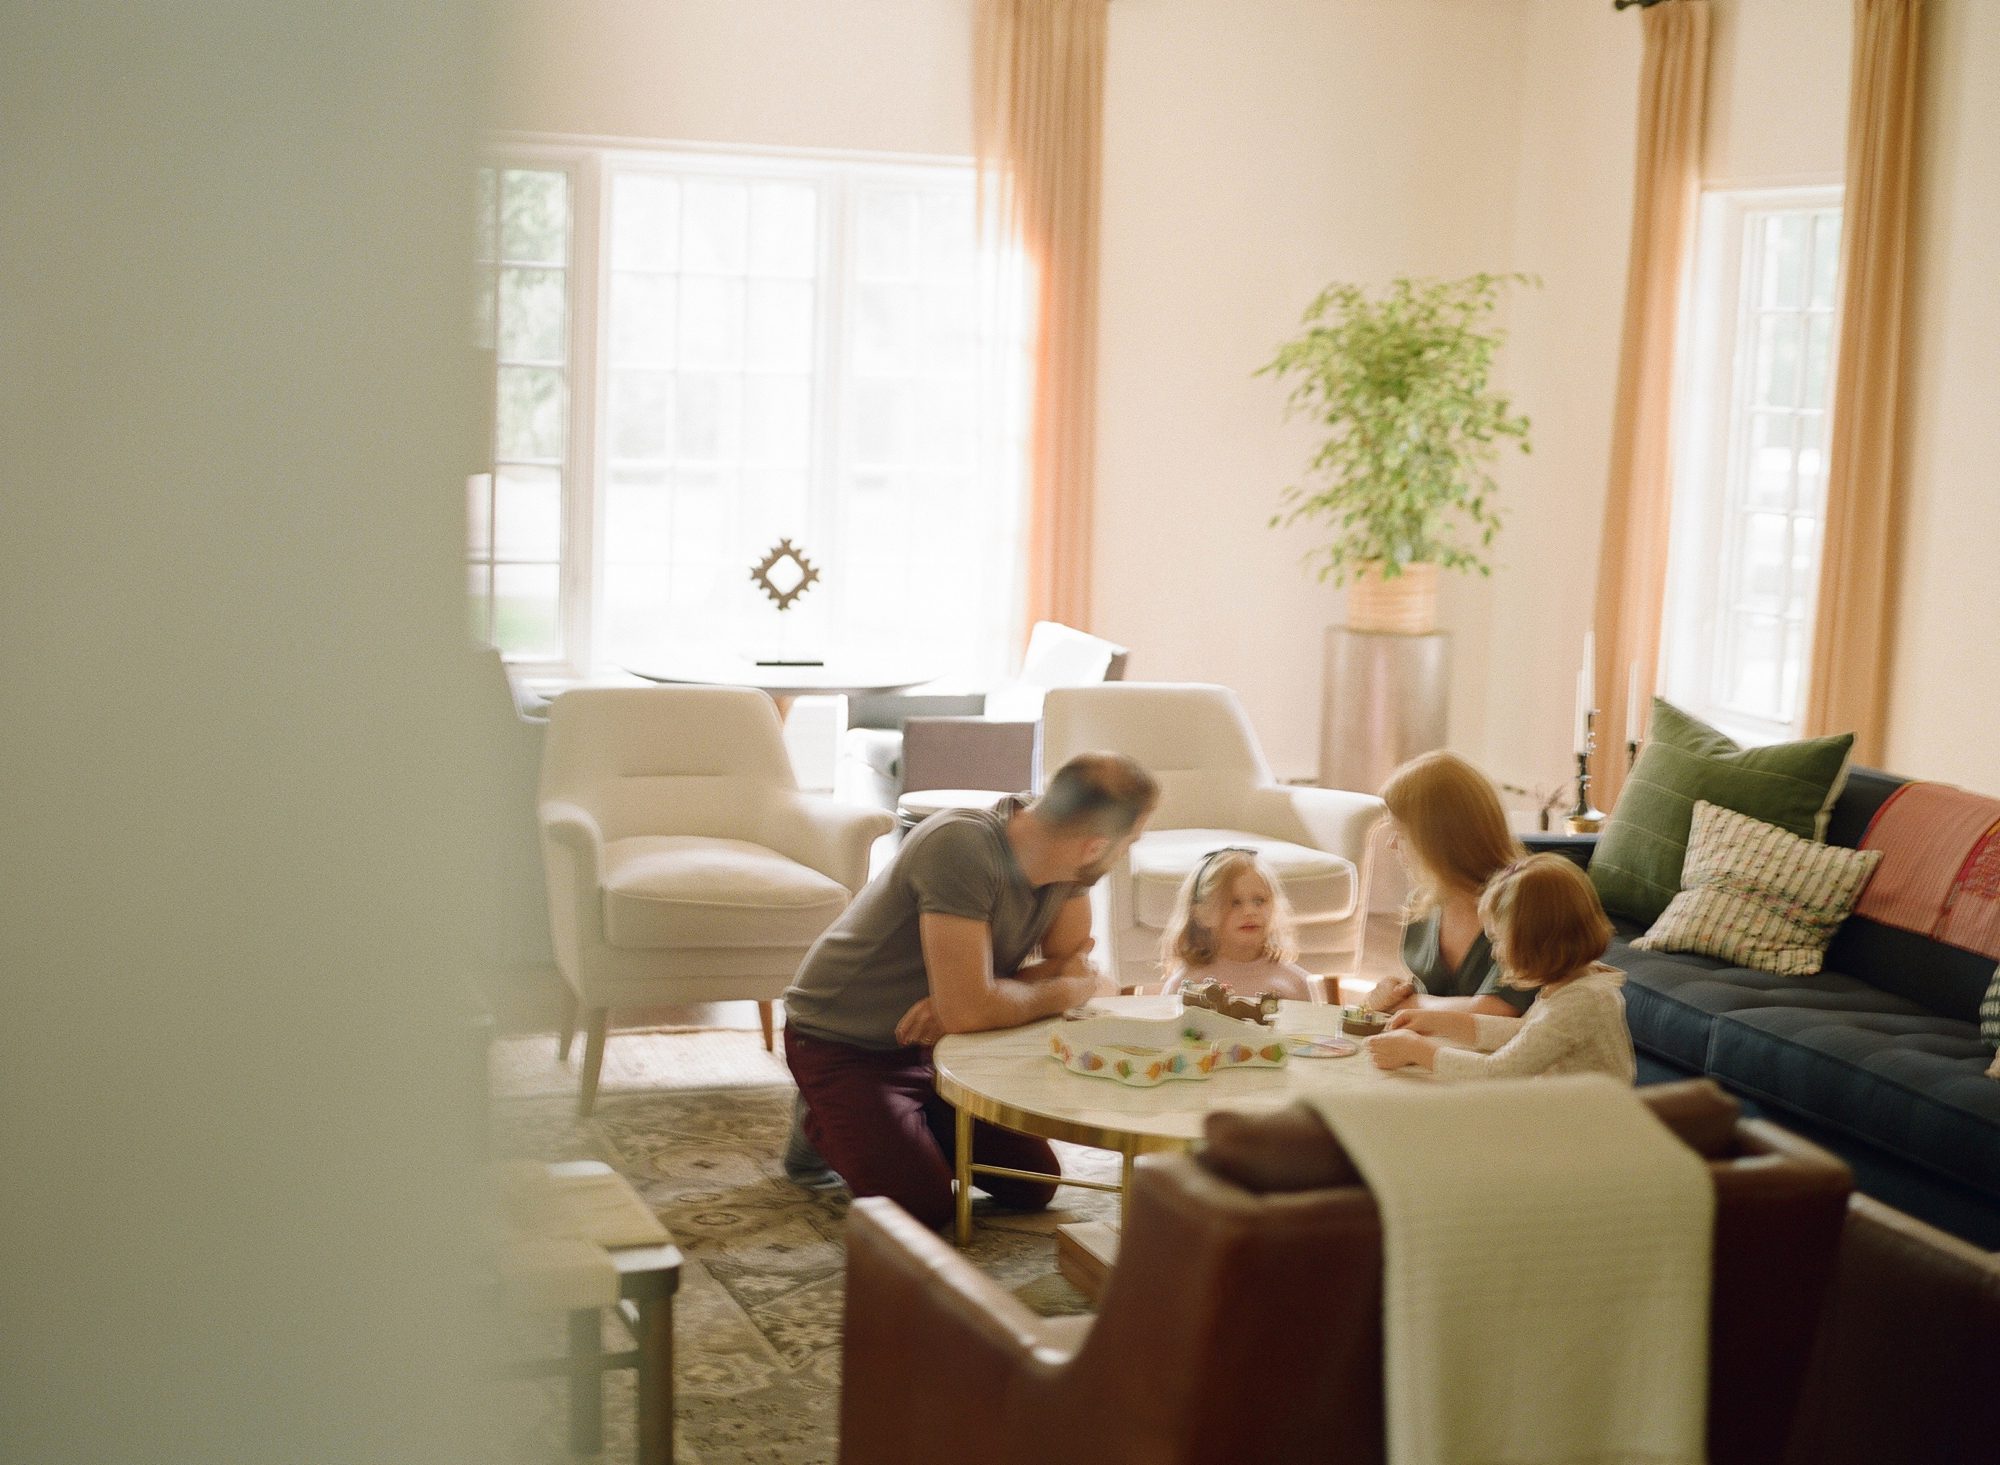 A family played games together during their chicago home lifestyle photoshoot